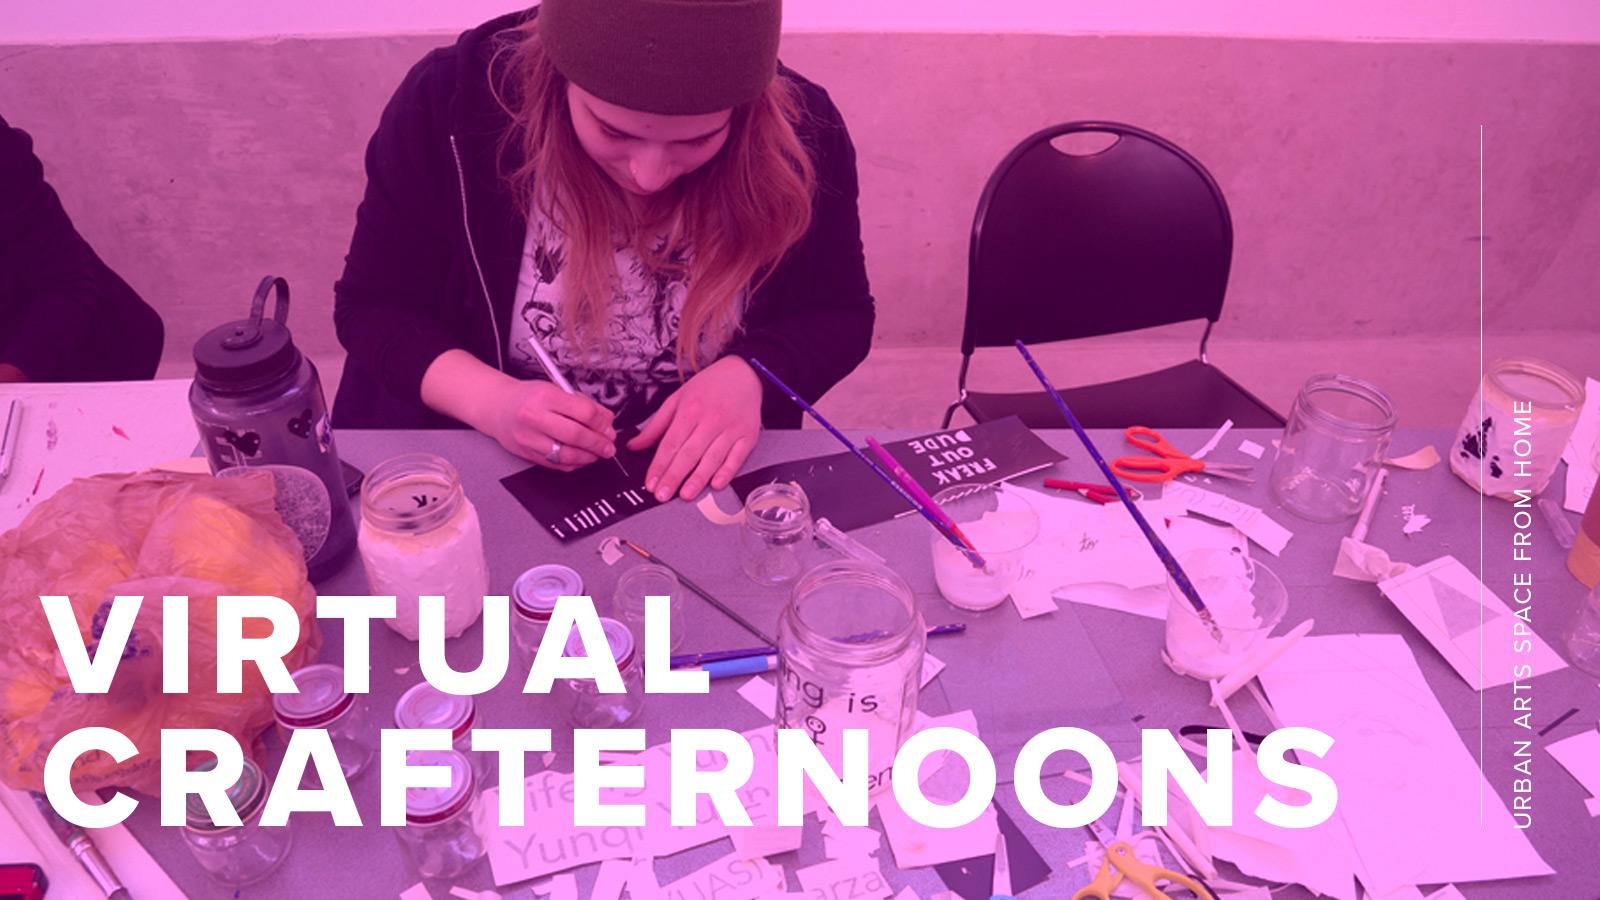 A person works on an art project covered by a pink overlay and text that says "Virtual Crafternoons"